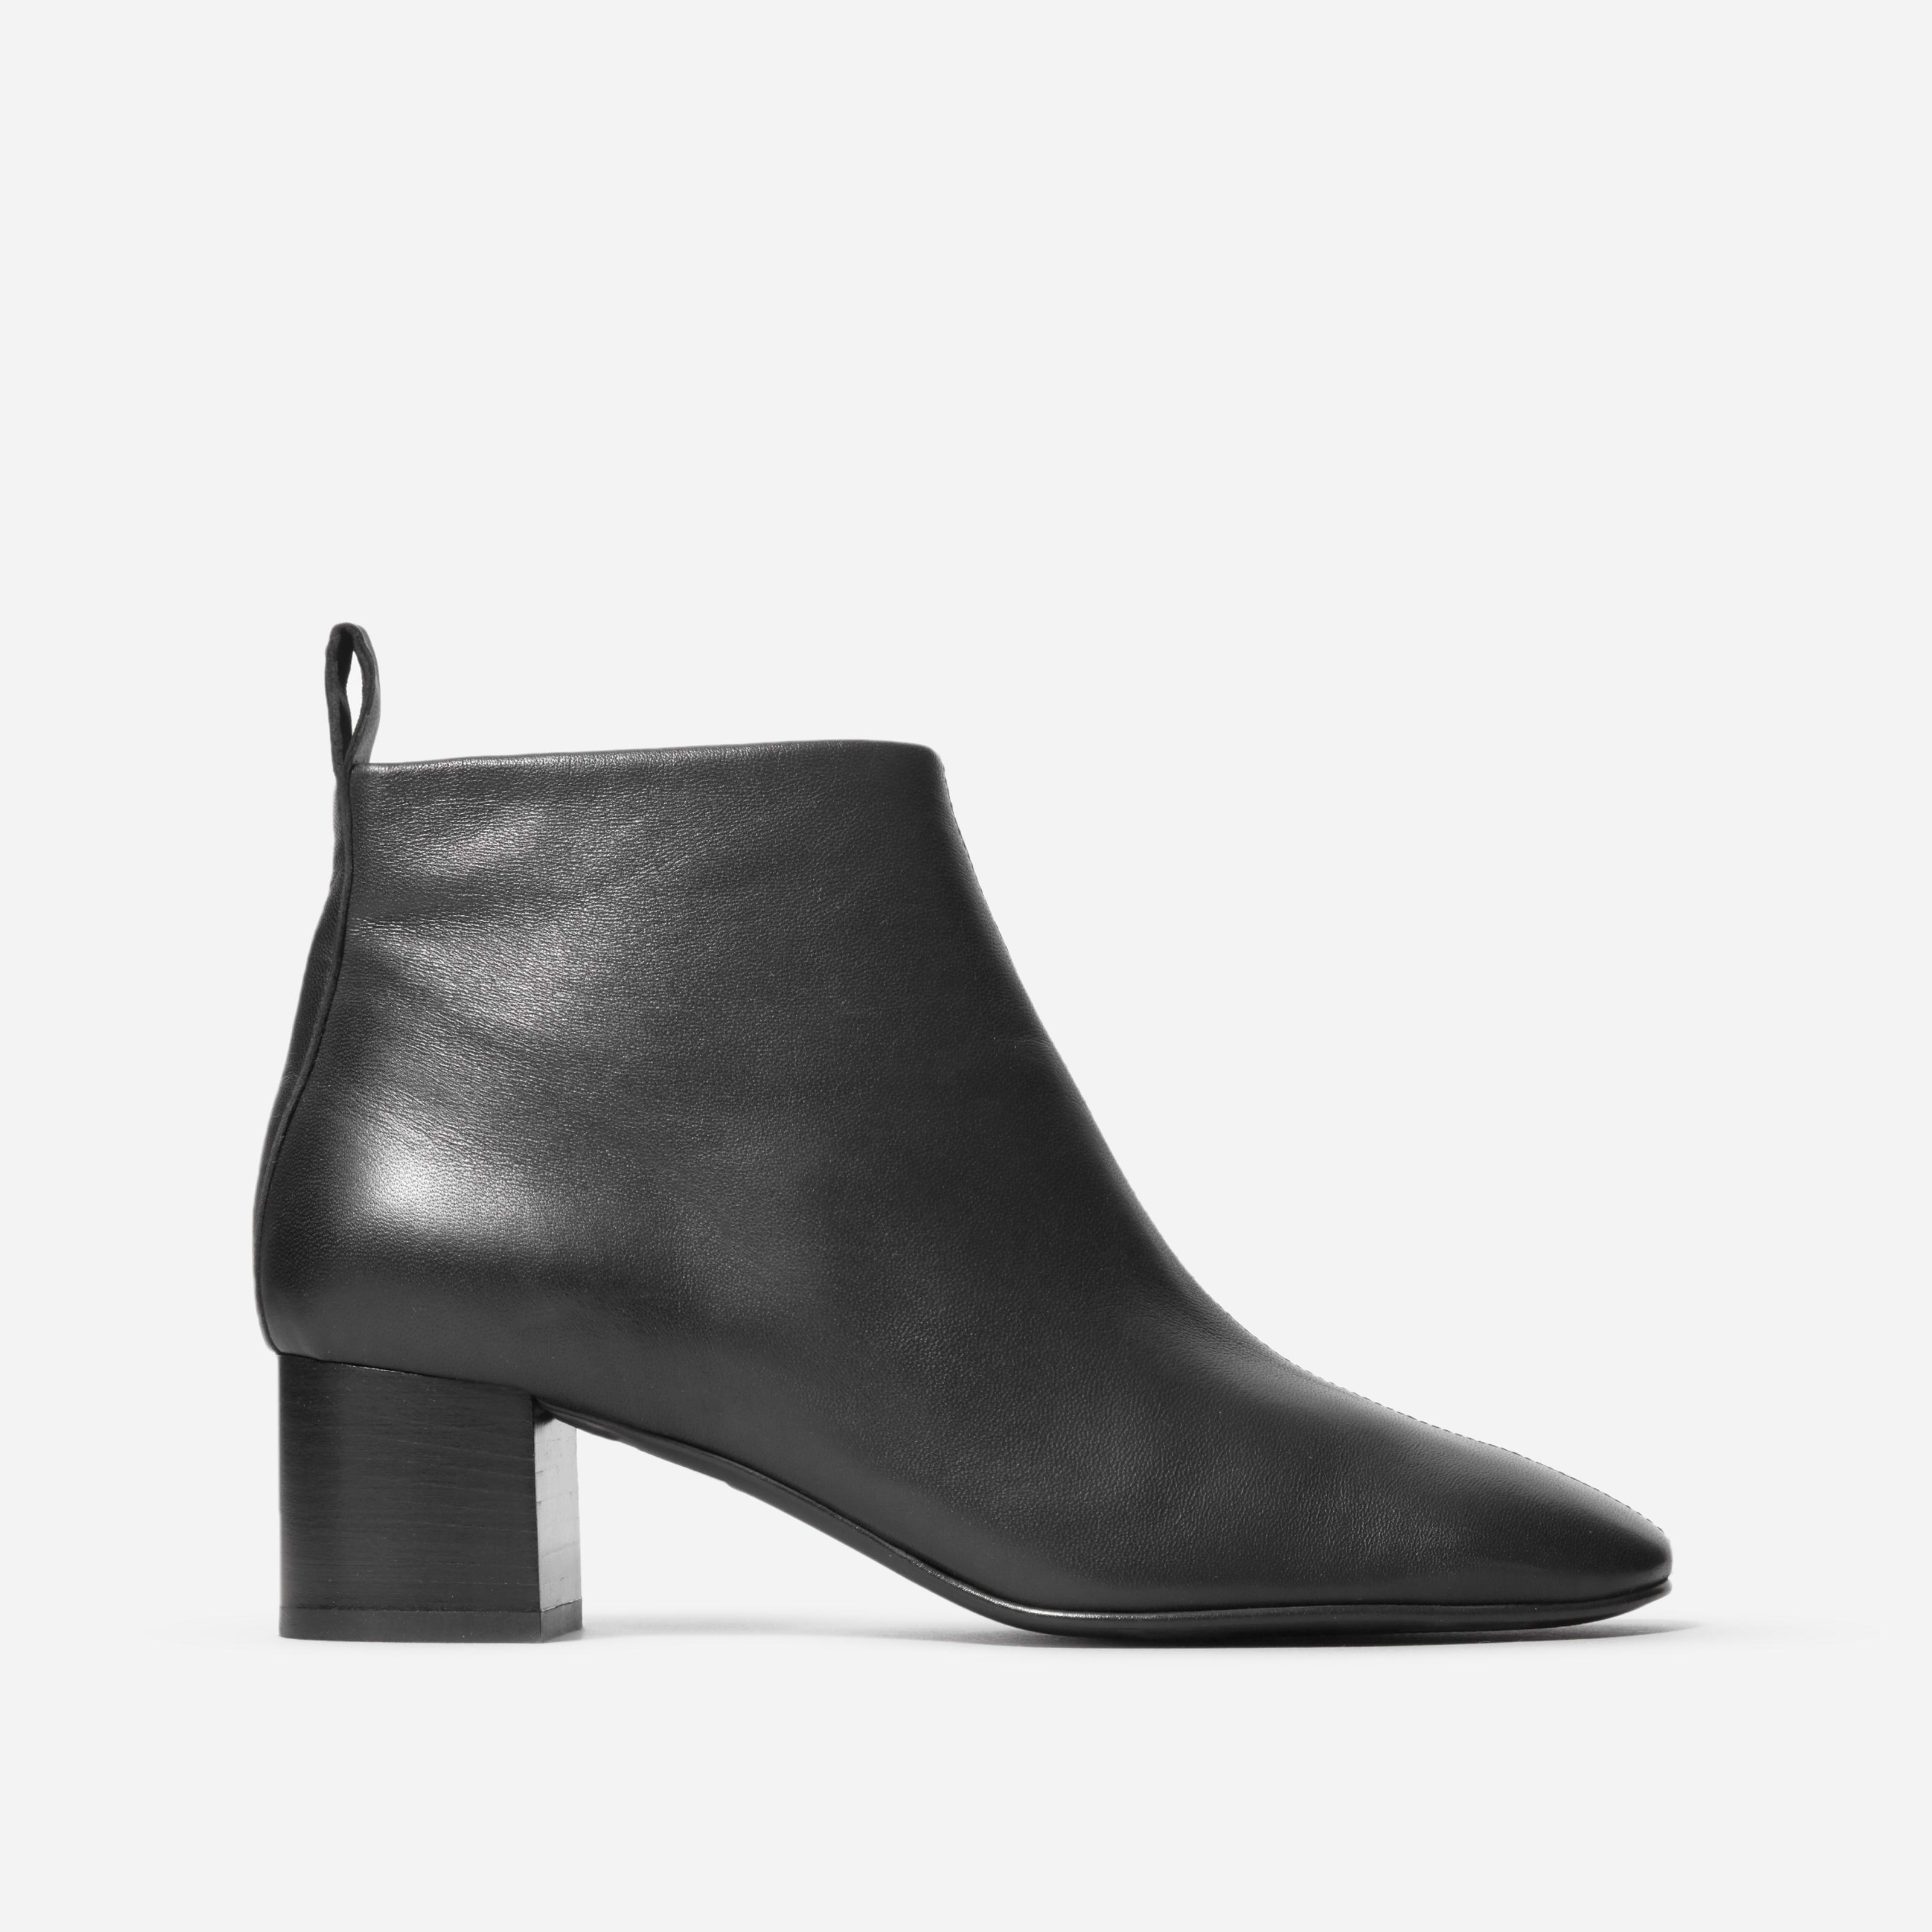 day ankle boot by everlane in black, size 5